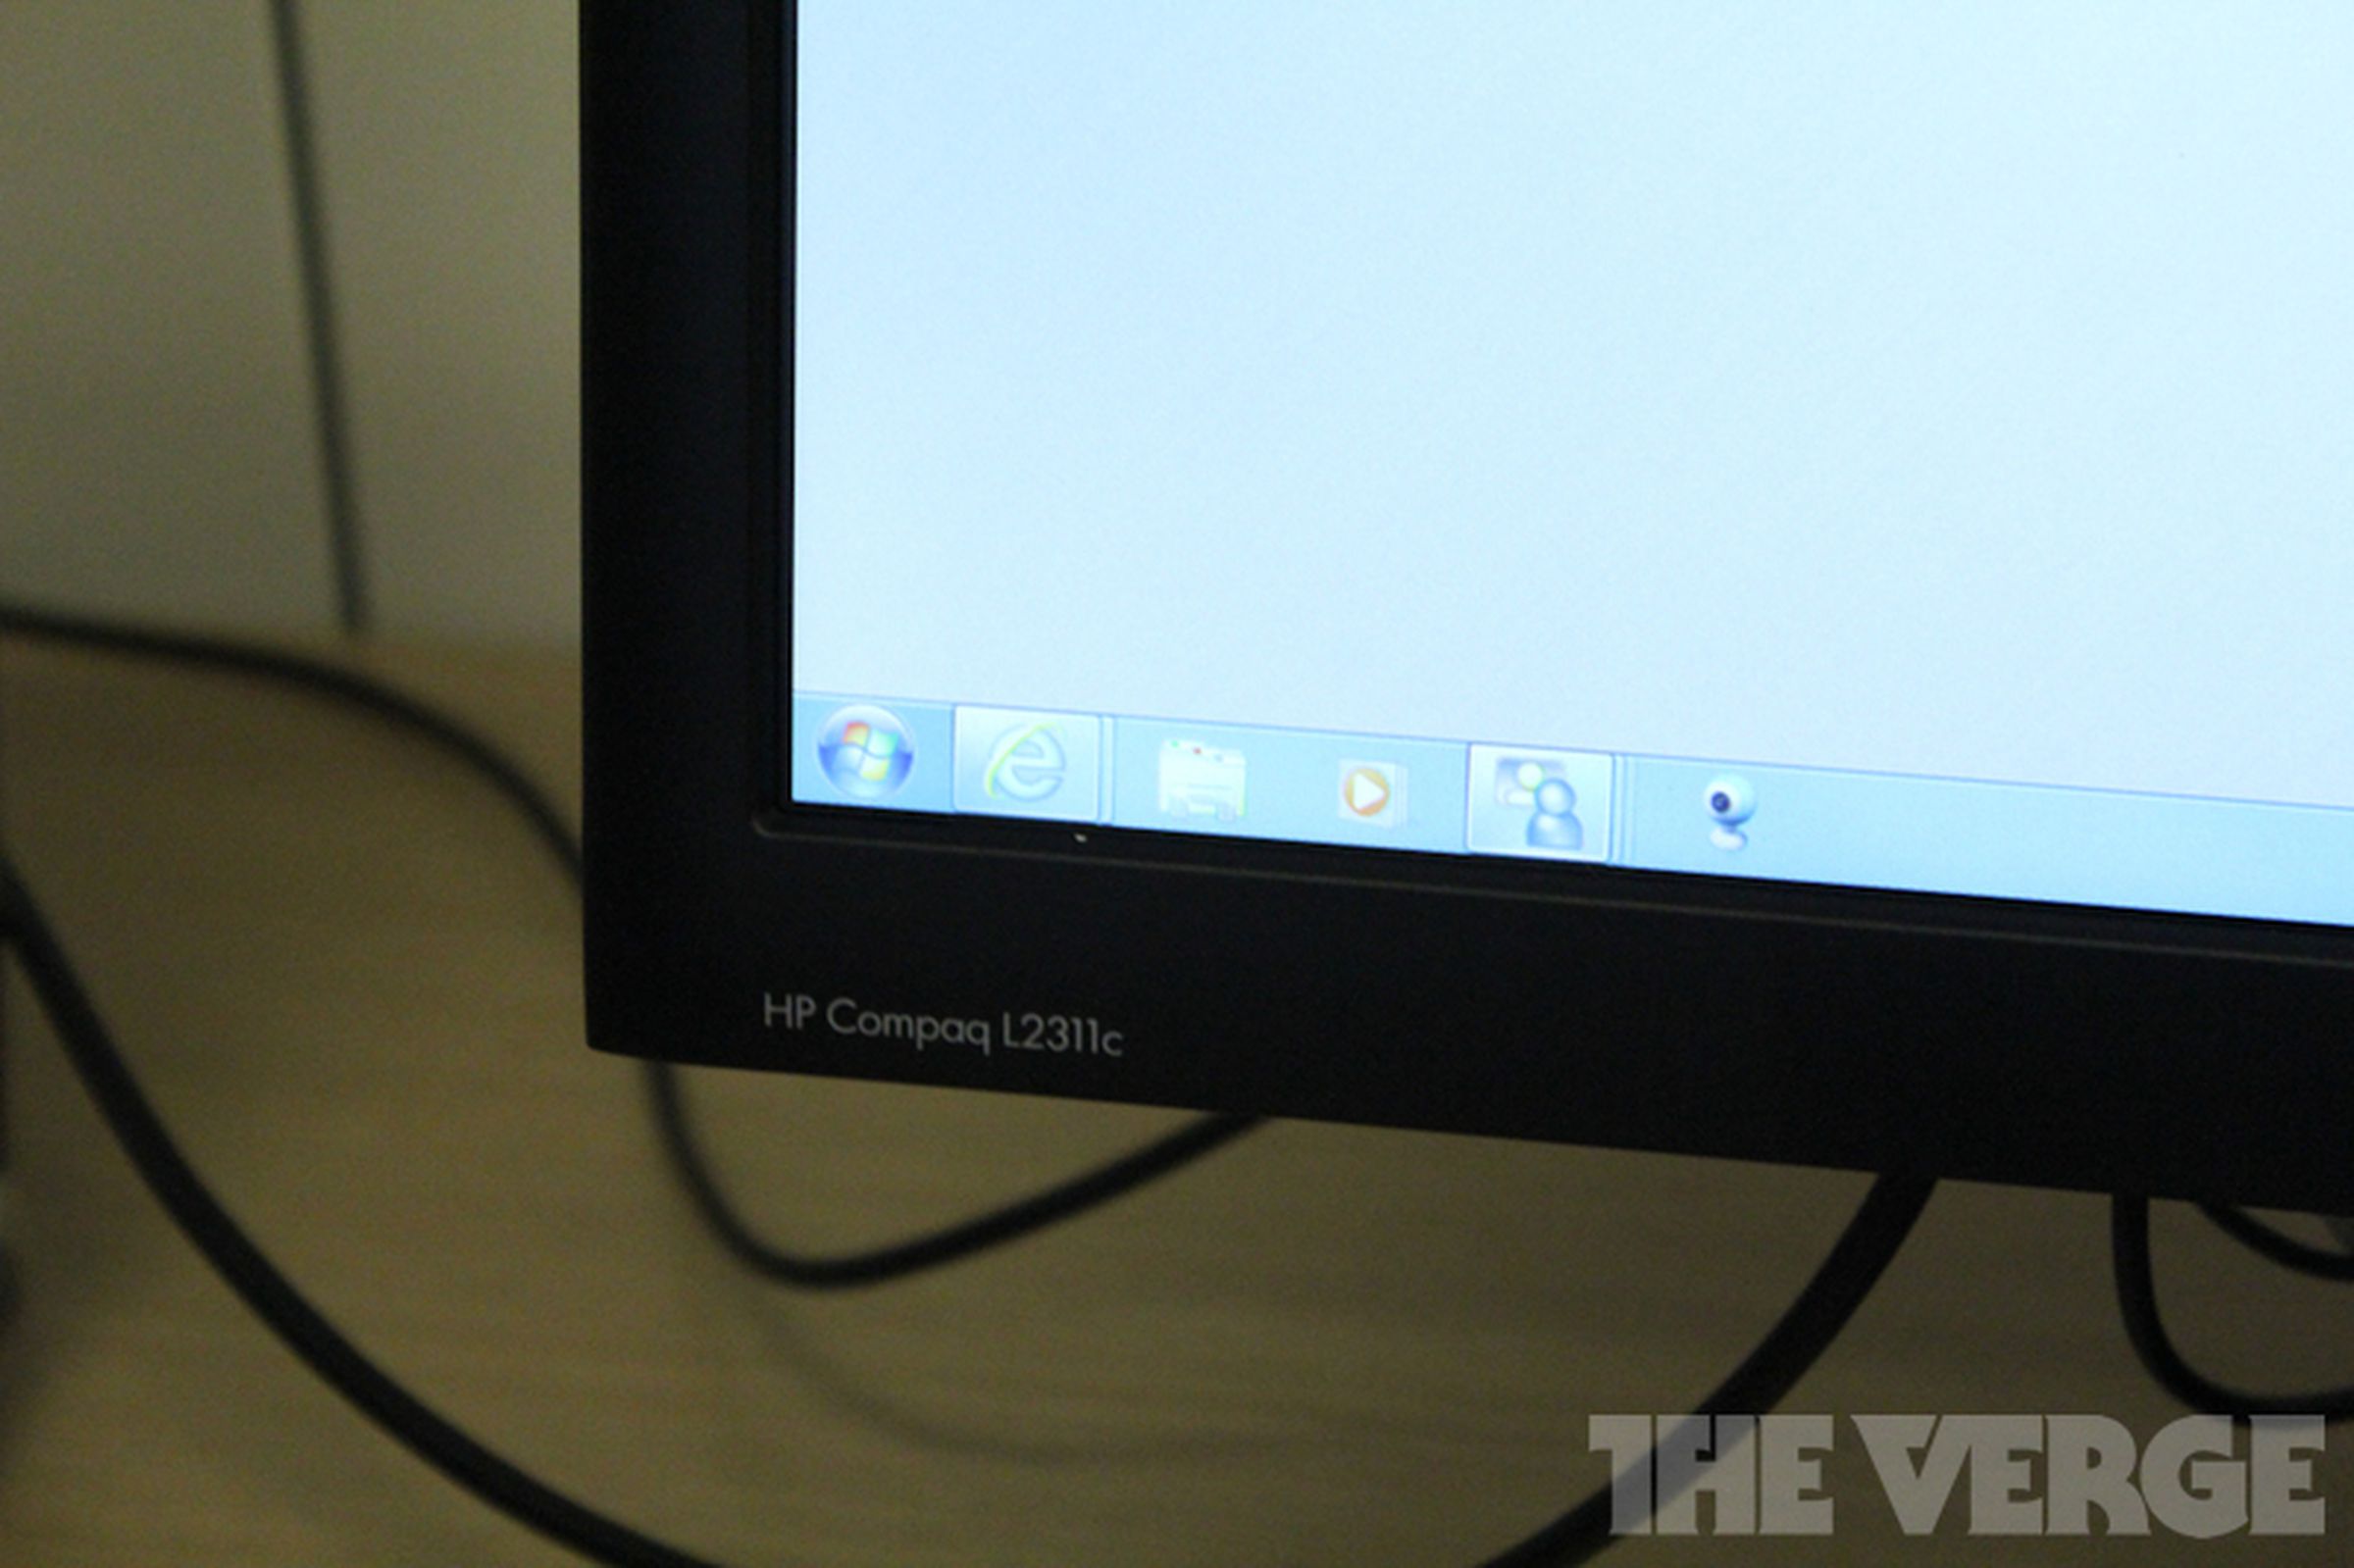 HP Compaq L2311c docking monitor hands-on and press photos